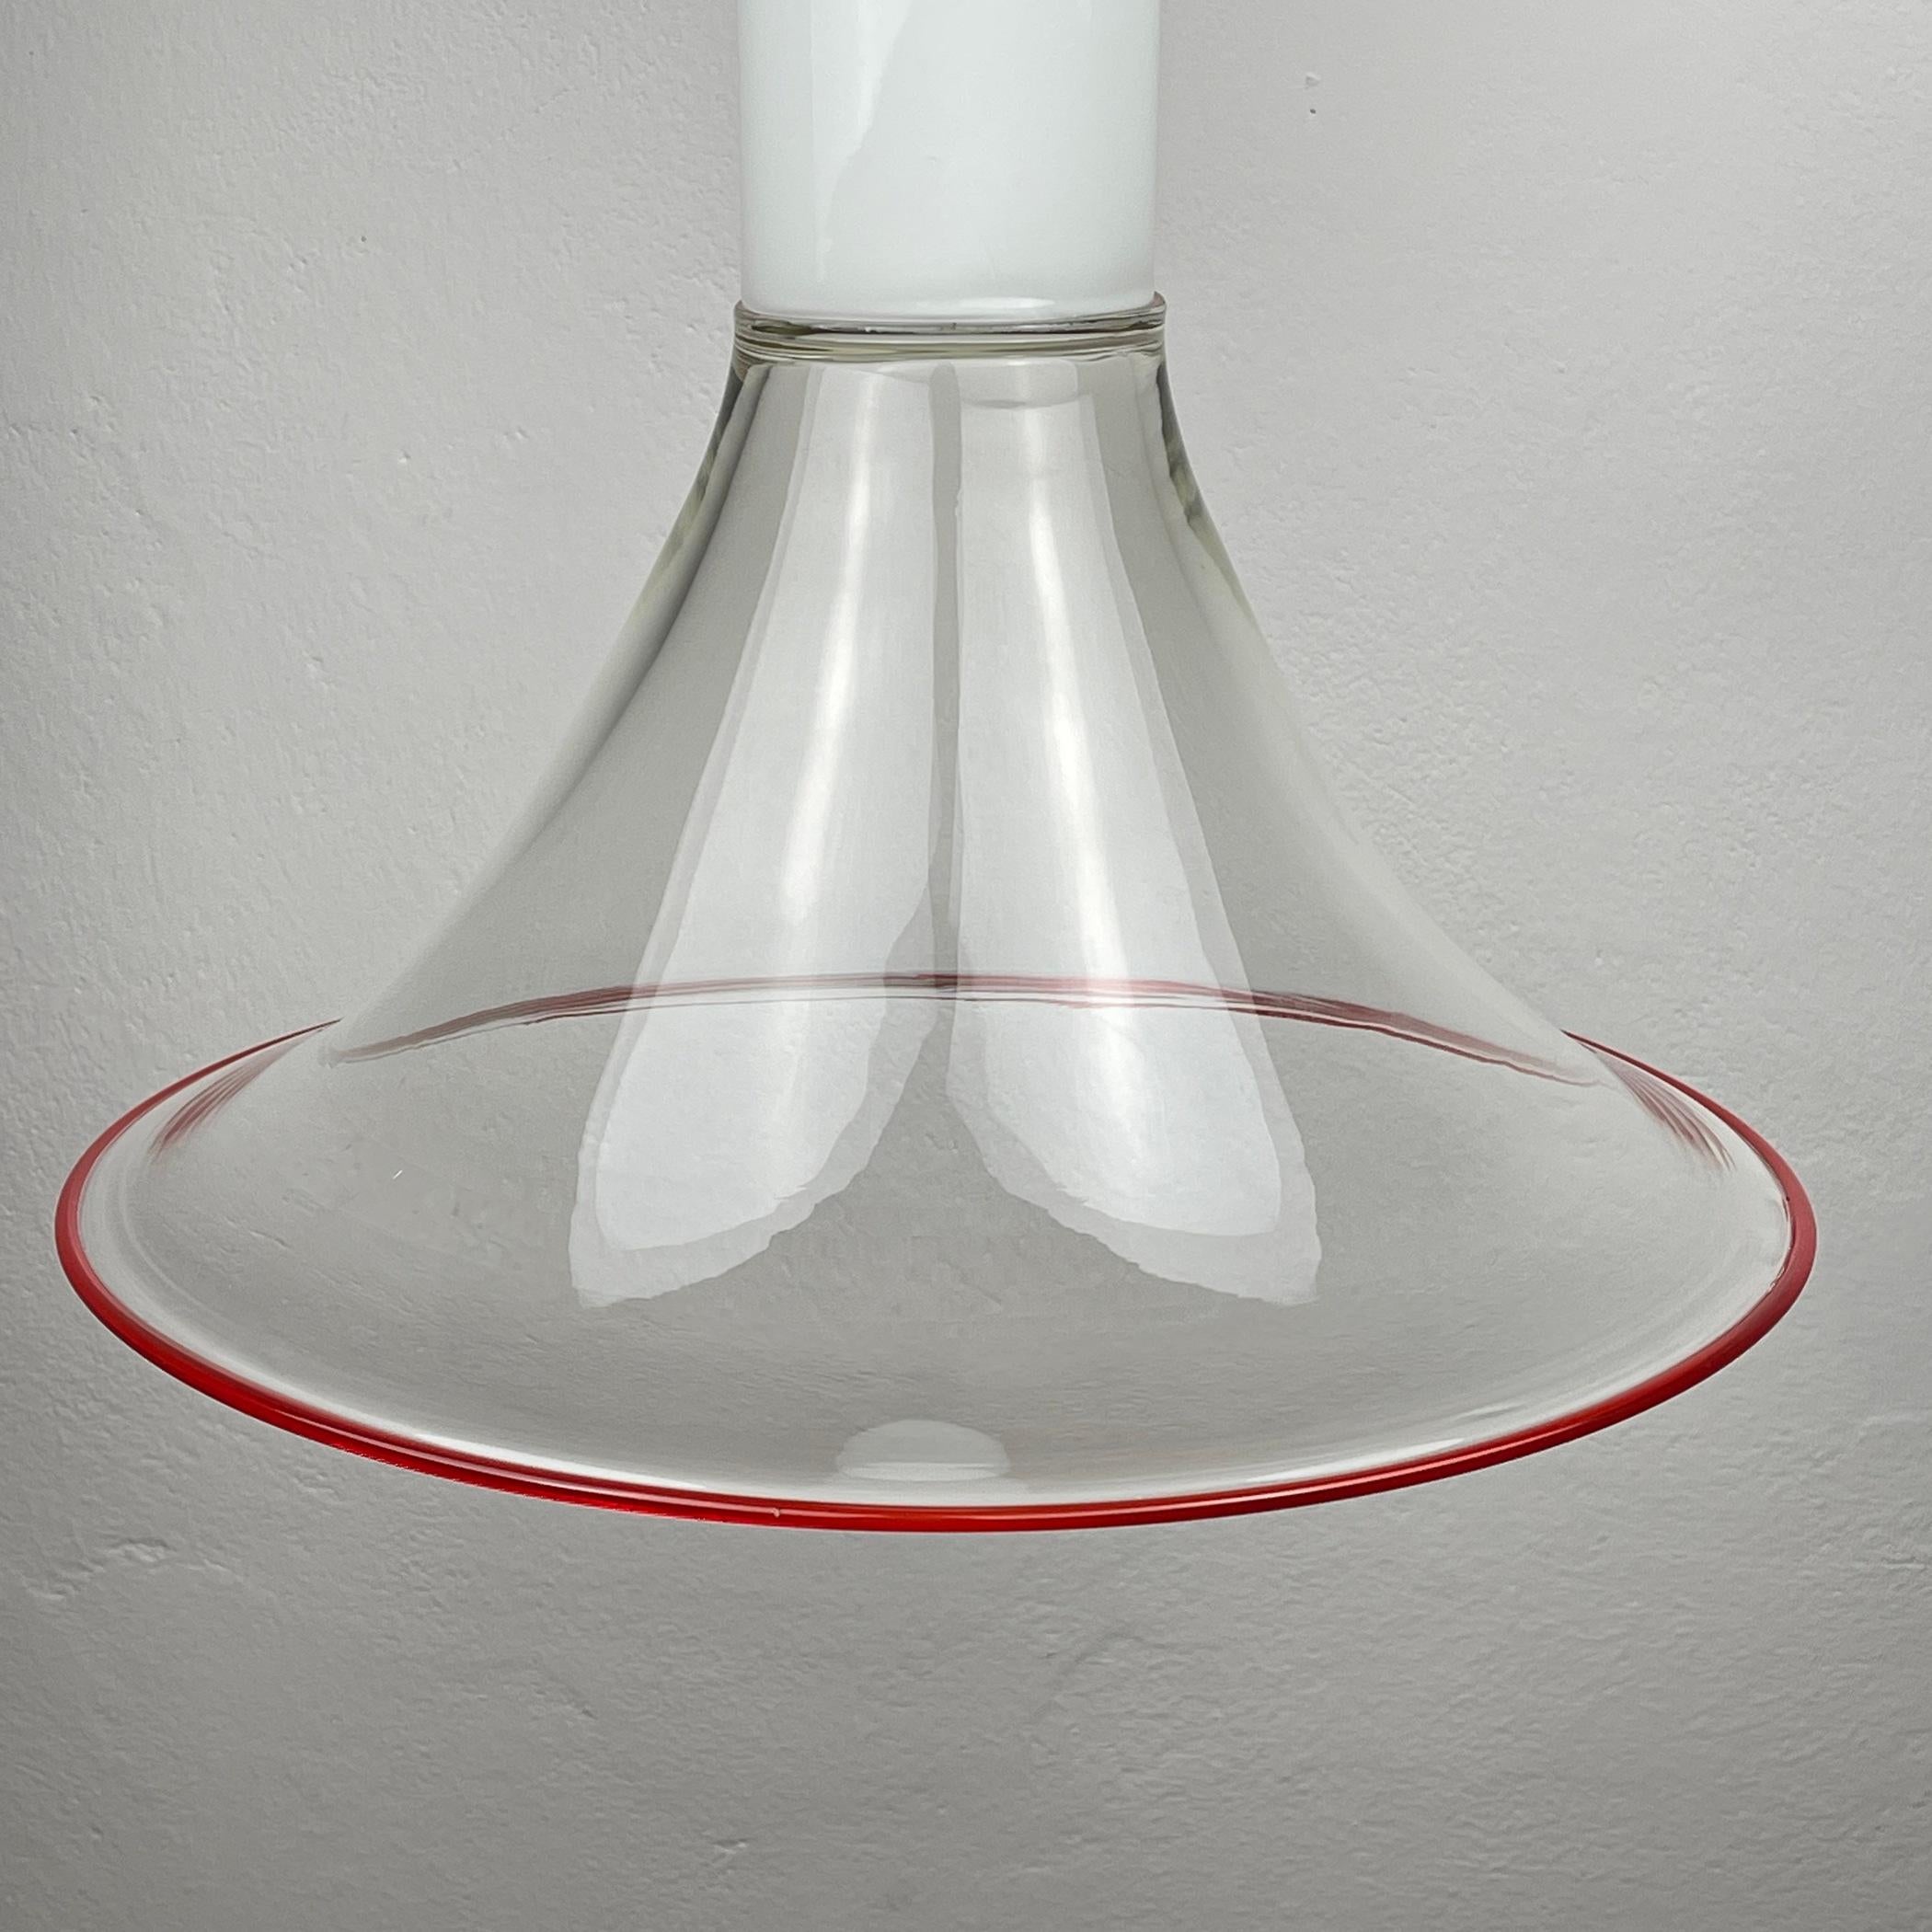 Murano pendant lamp Samanta by Roberto Pamio for Leucos Italy 1970s For Sale 1